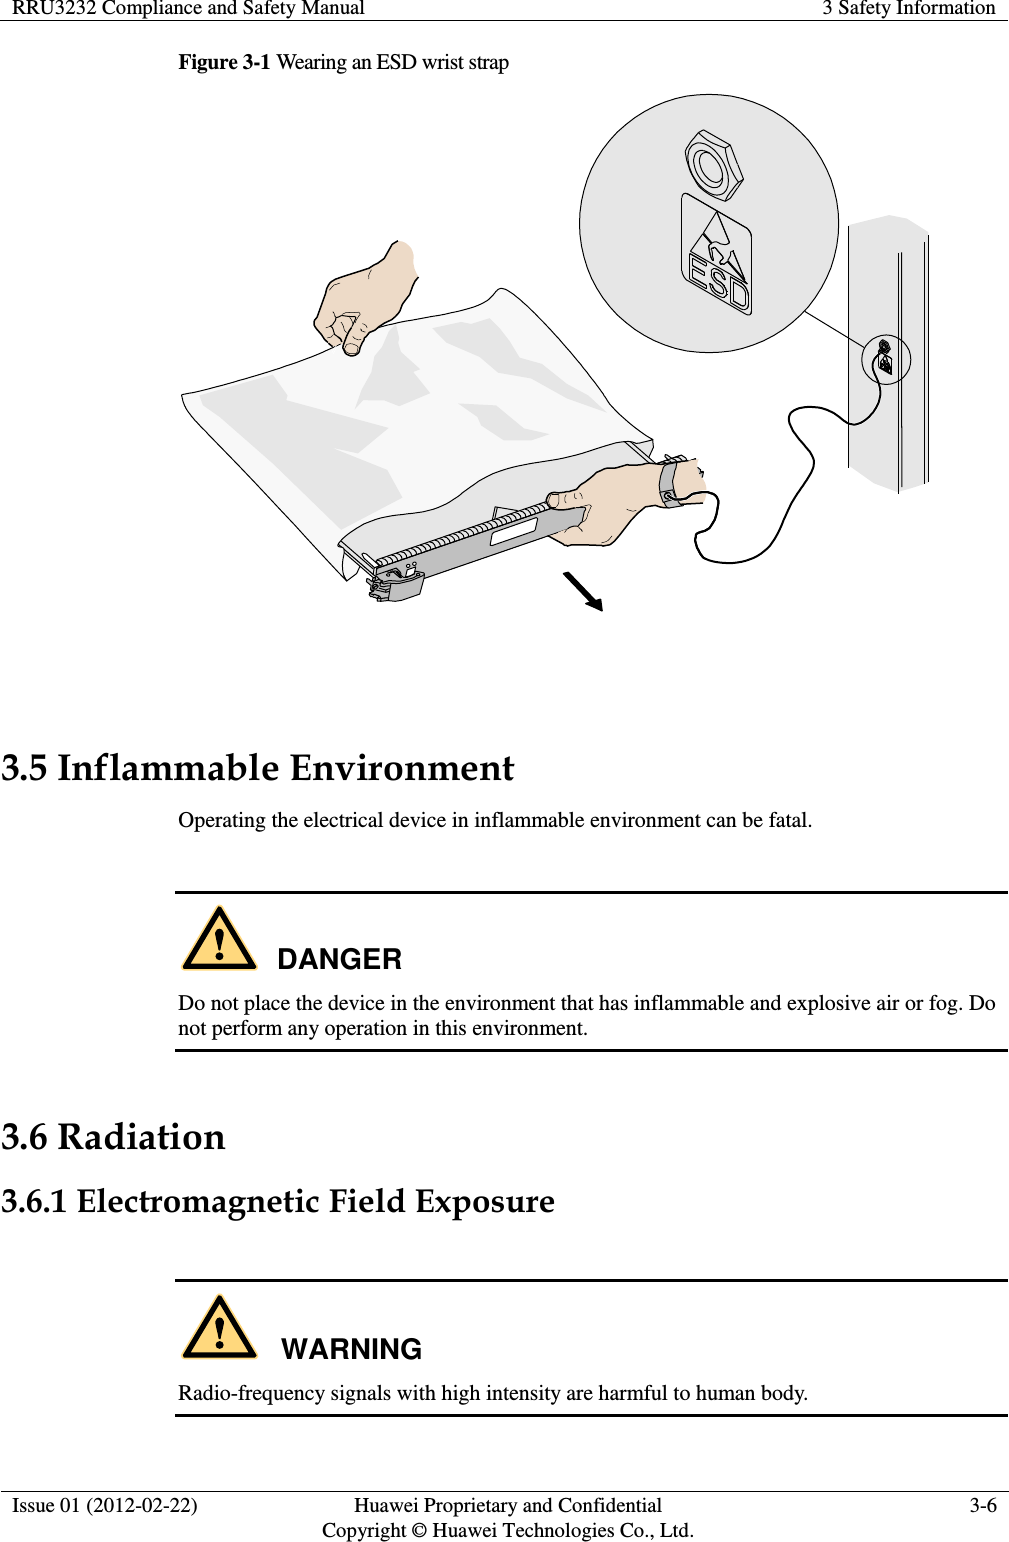 RRU3232 Compliance and Safety Manual 3 Safety Information  Issue 01 (2012-02-22) Huawei Proprietary and Confidential         Copyright © Huawei Technologies Co., Ltd. 3-6  Figure 3-1 Wearing an ESD wrist strap   3.5 Inflammable Environment Operating the electrical device in inflammable environment can be fatal.  DANGER Do not place the device in the environment that has inflammable and explosive air or fog. Do not perform any operation in this environment. 3.6 Radiation 3.6.1 Electromagnetic Field Exposure  WARNING Radio-frequency signals with high intensity are harmful to human body. 